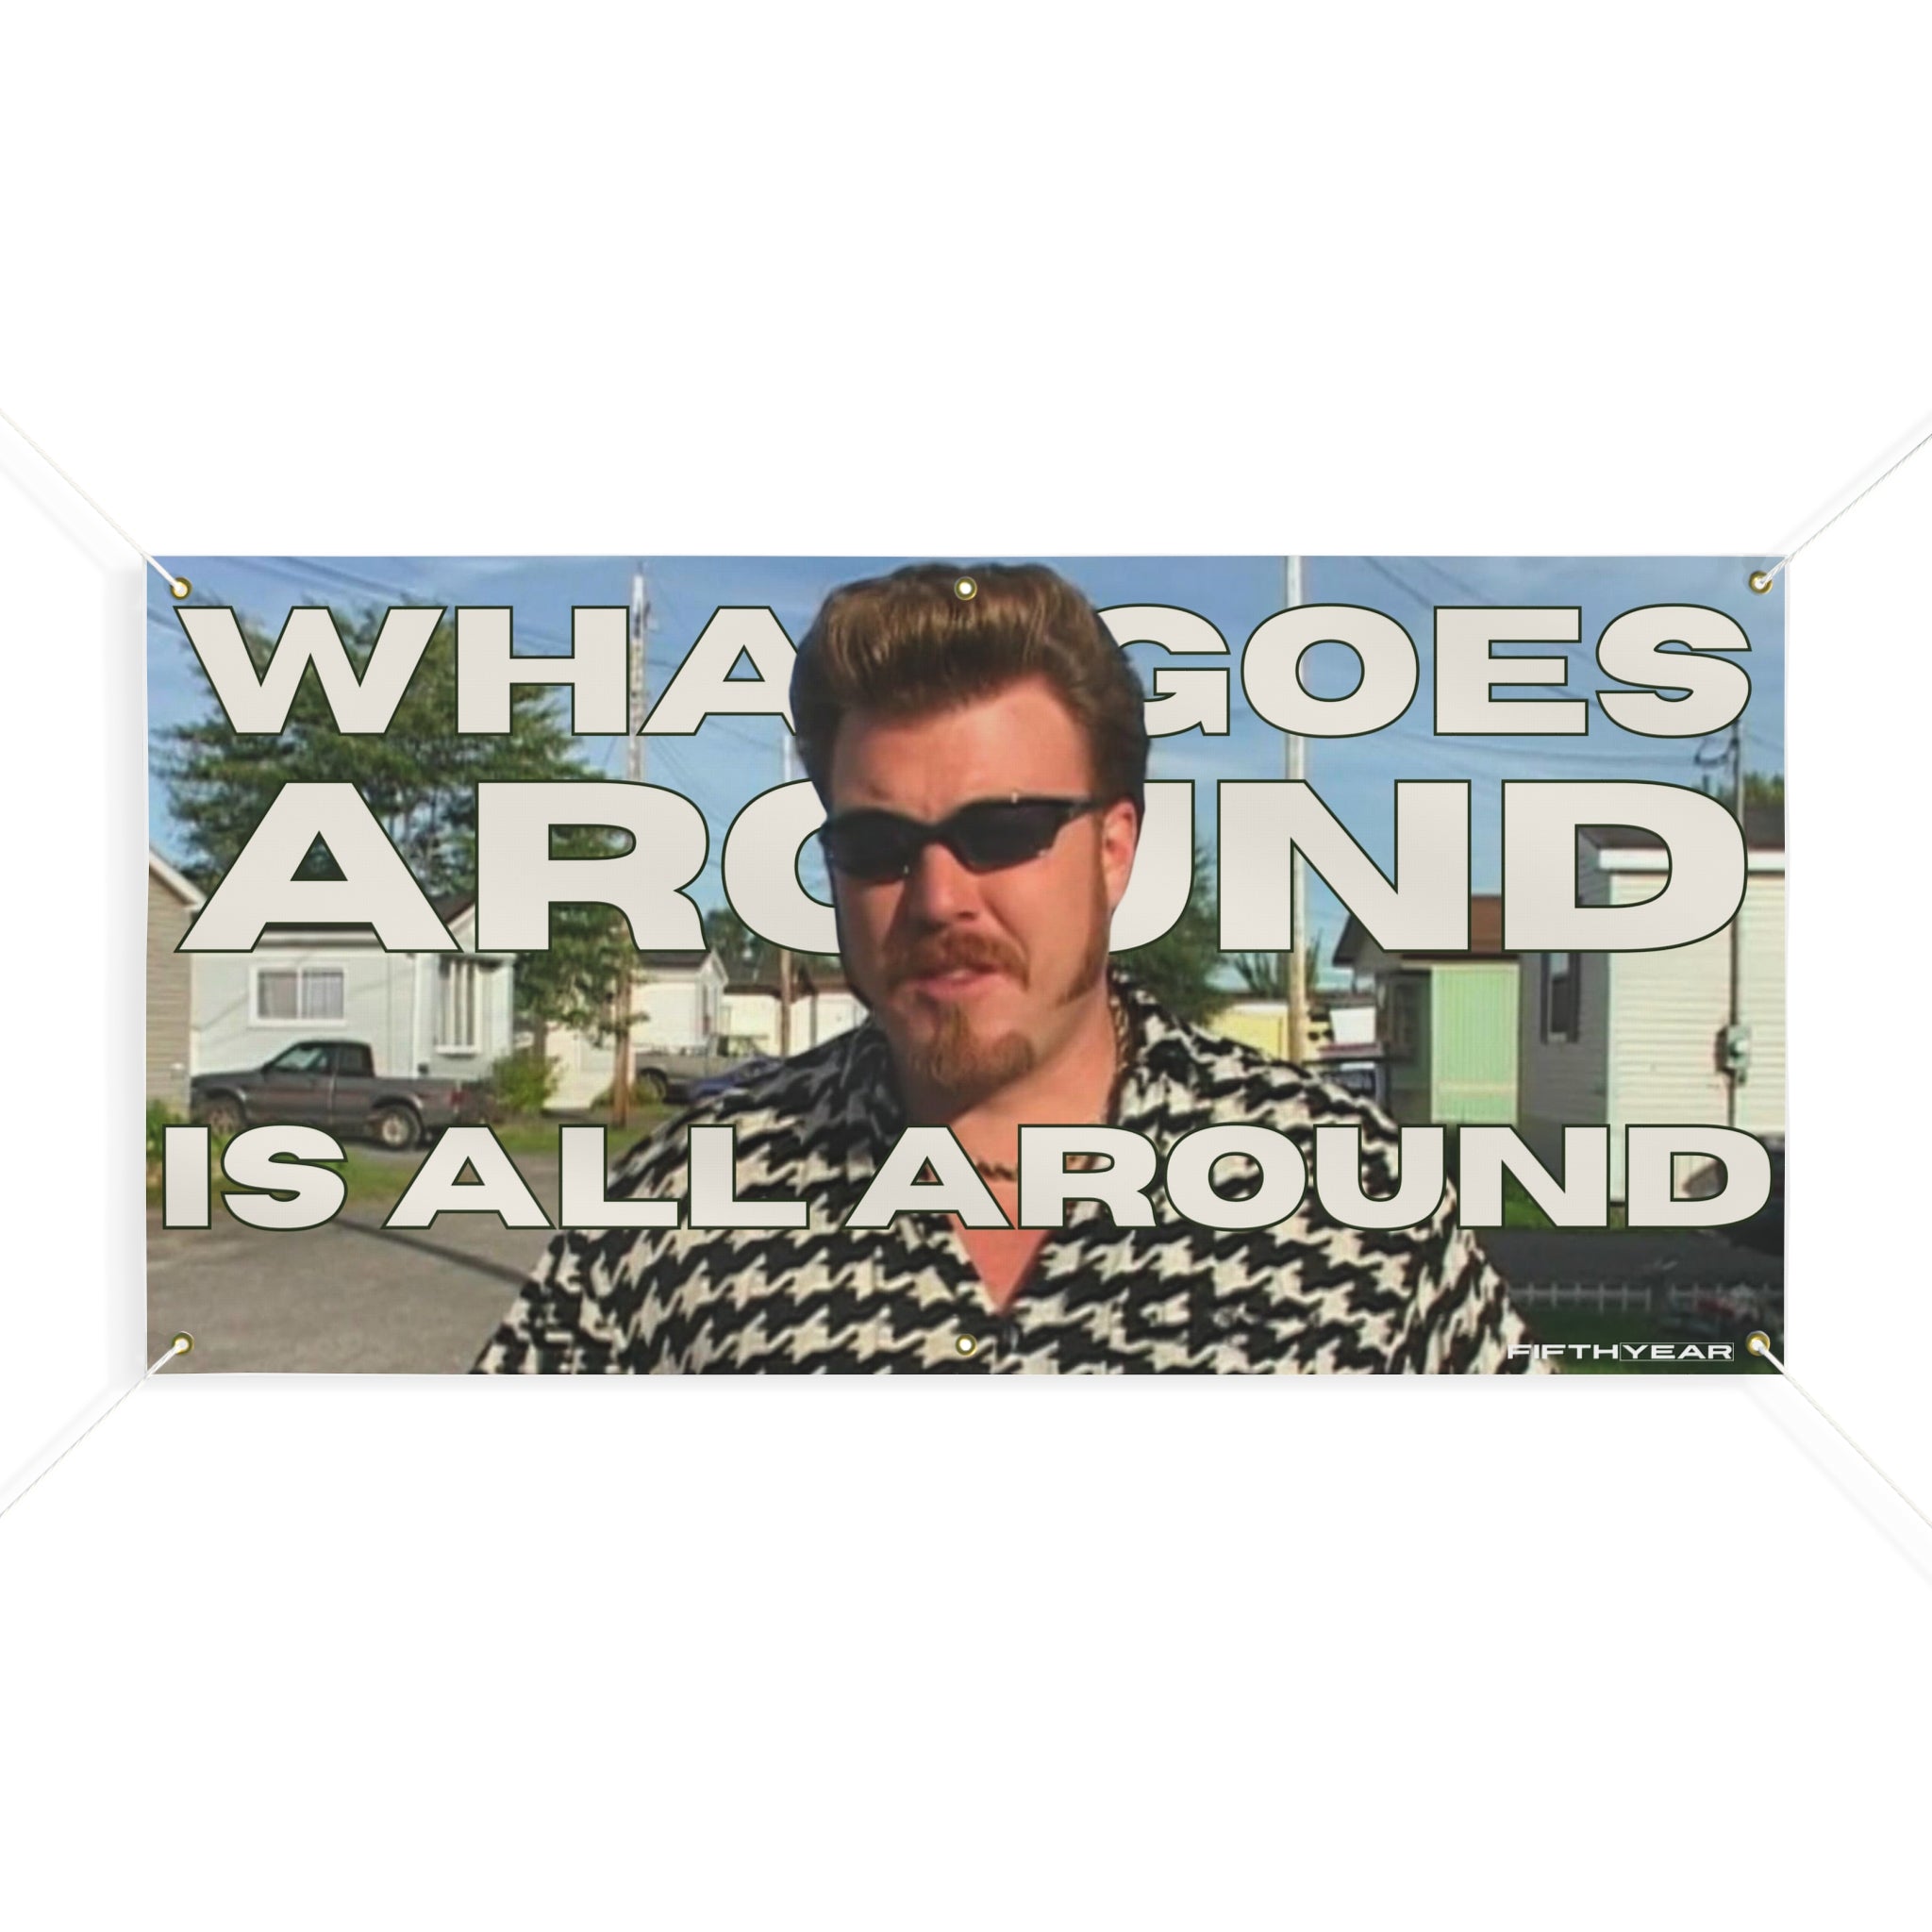 Ricky Trailer Park Boys "What goes around is all around" - Flag